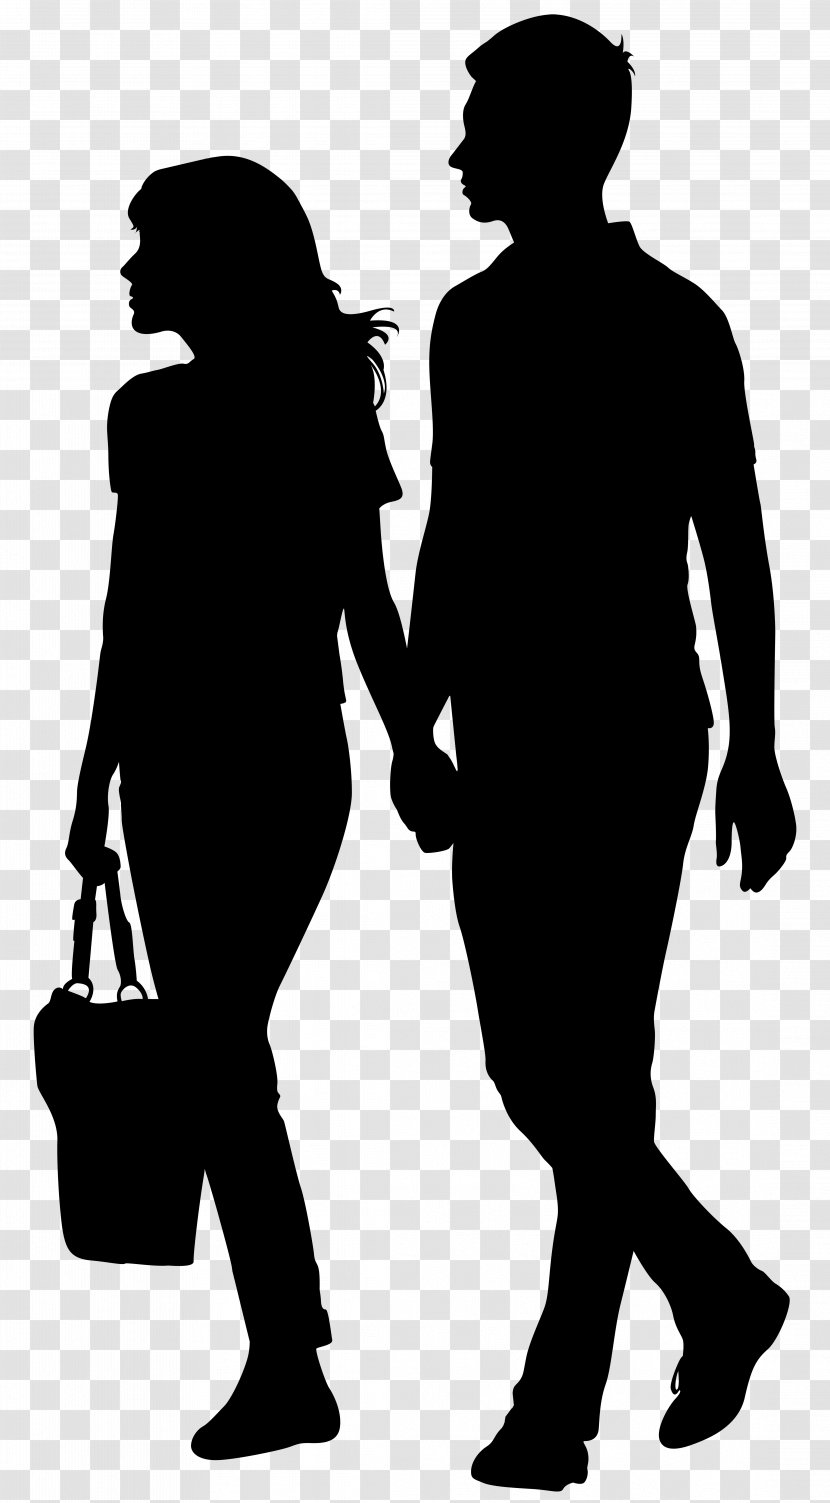 Song Lyrics YouTube Film MPEG-4 Part 14 - Human - Holding Hands Couple_Silhouette Clip Art Image Transparent PNG